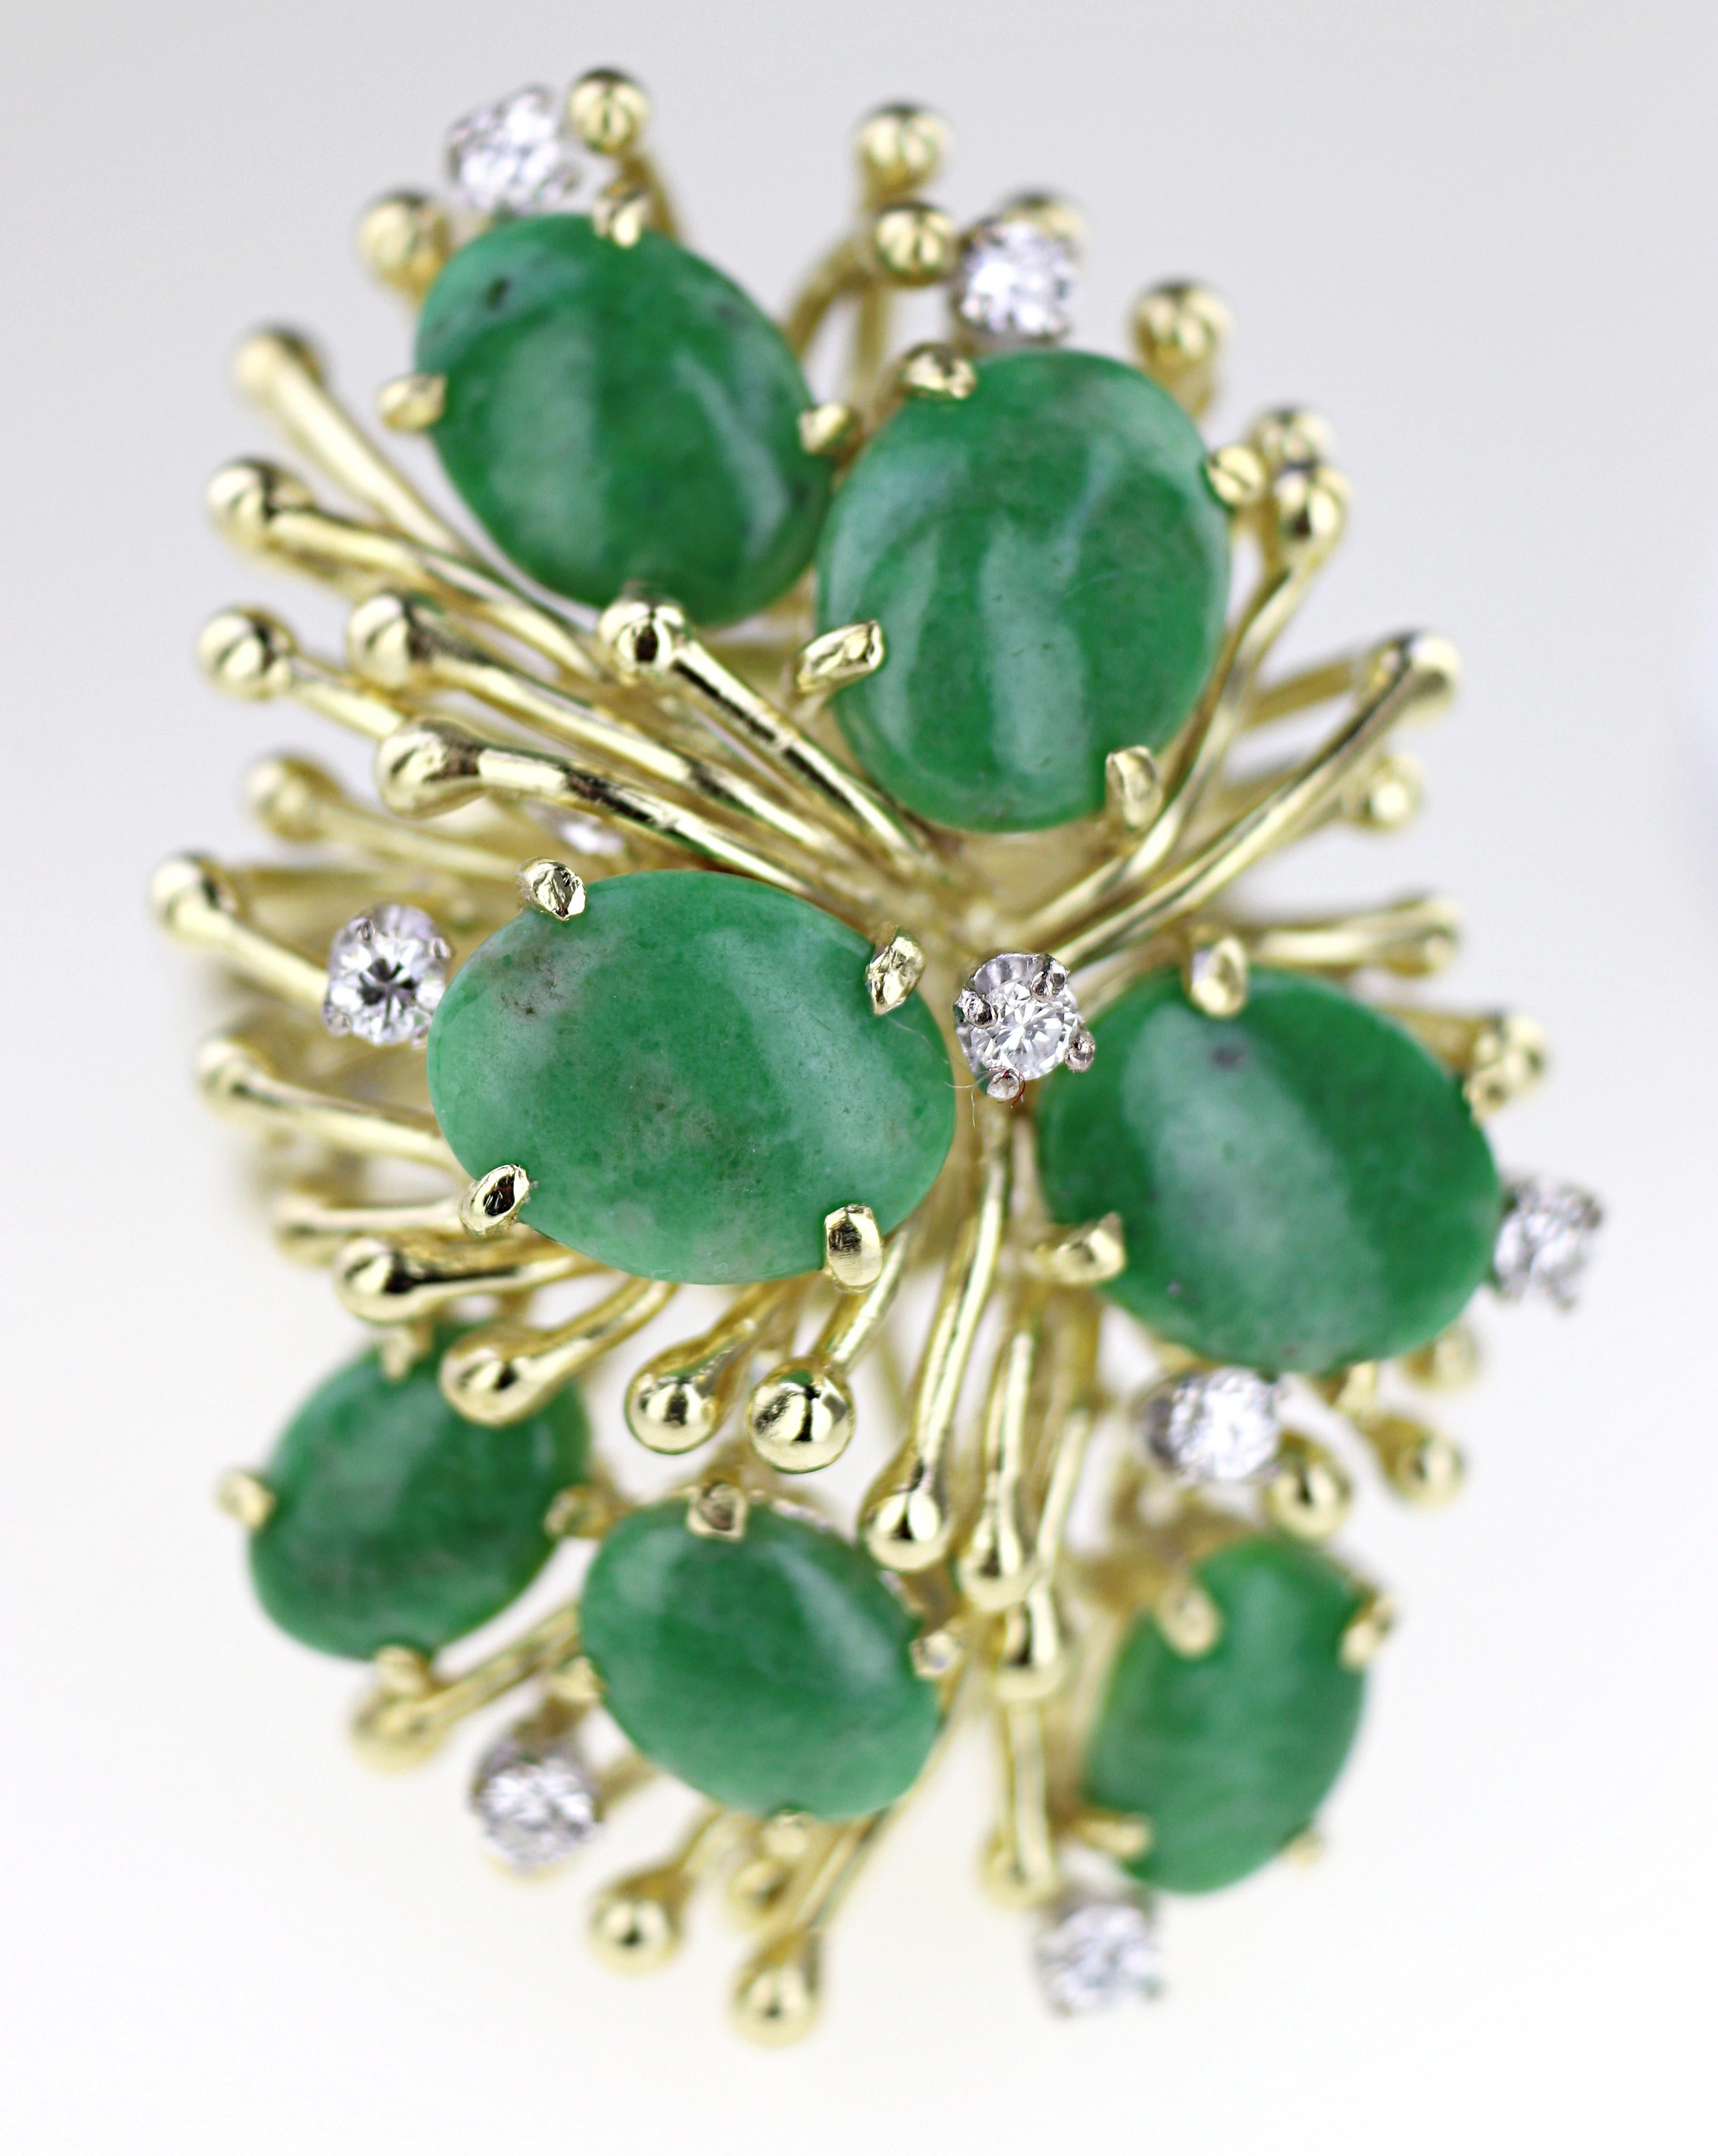 Featuring (7) oval green jadeite Jade cabochons, 9 X 6 mm to 7 X 6 mm, accented by (8) full-cut diamonds, 0.25 ct. tw., I, I-J, set in an 18k yellow gold spray cluster mounting, 35 X 24 X 5.5 mm, marked 18K, size 7*, Gross weight 16.27 grams.